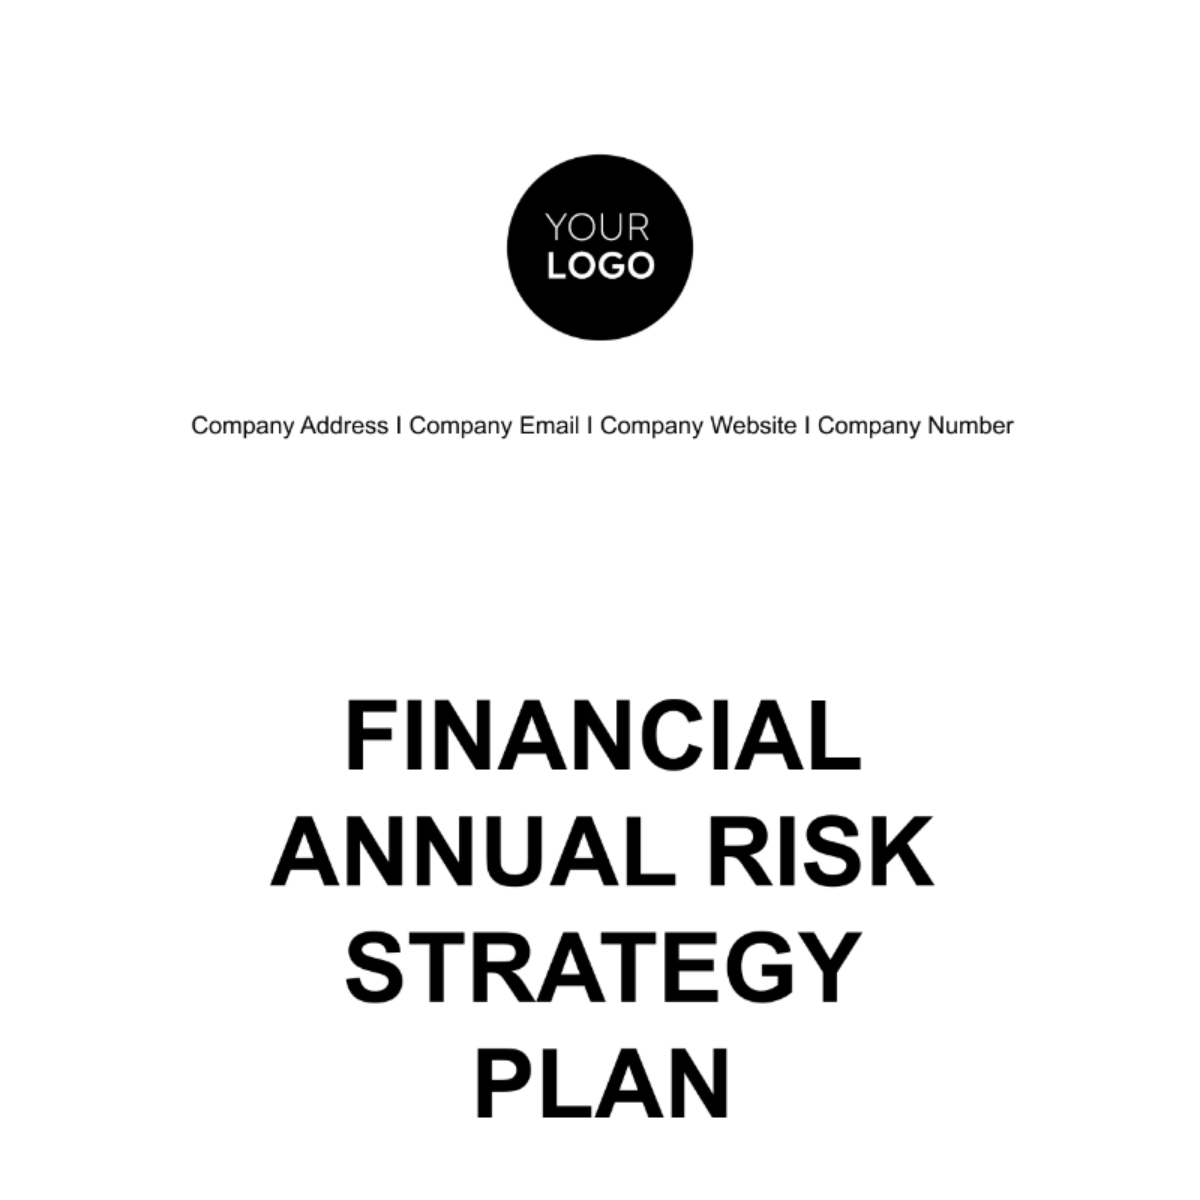 Financial Annual Risk Strategy Plan Template